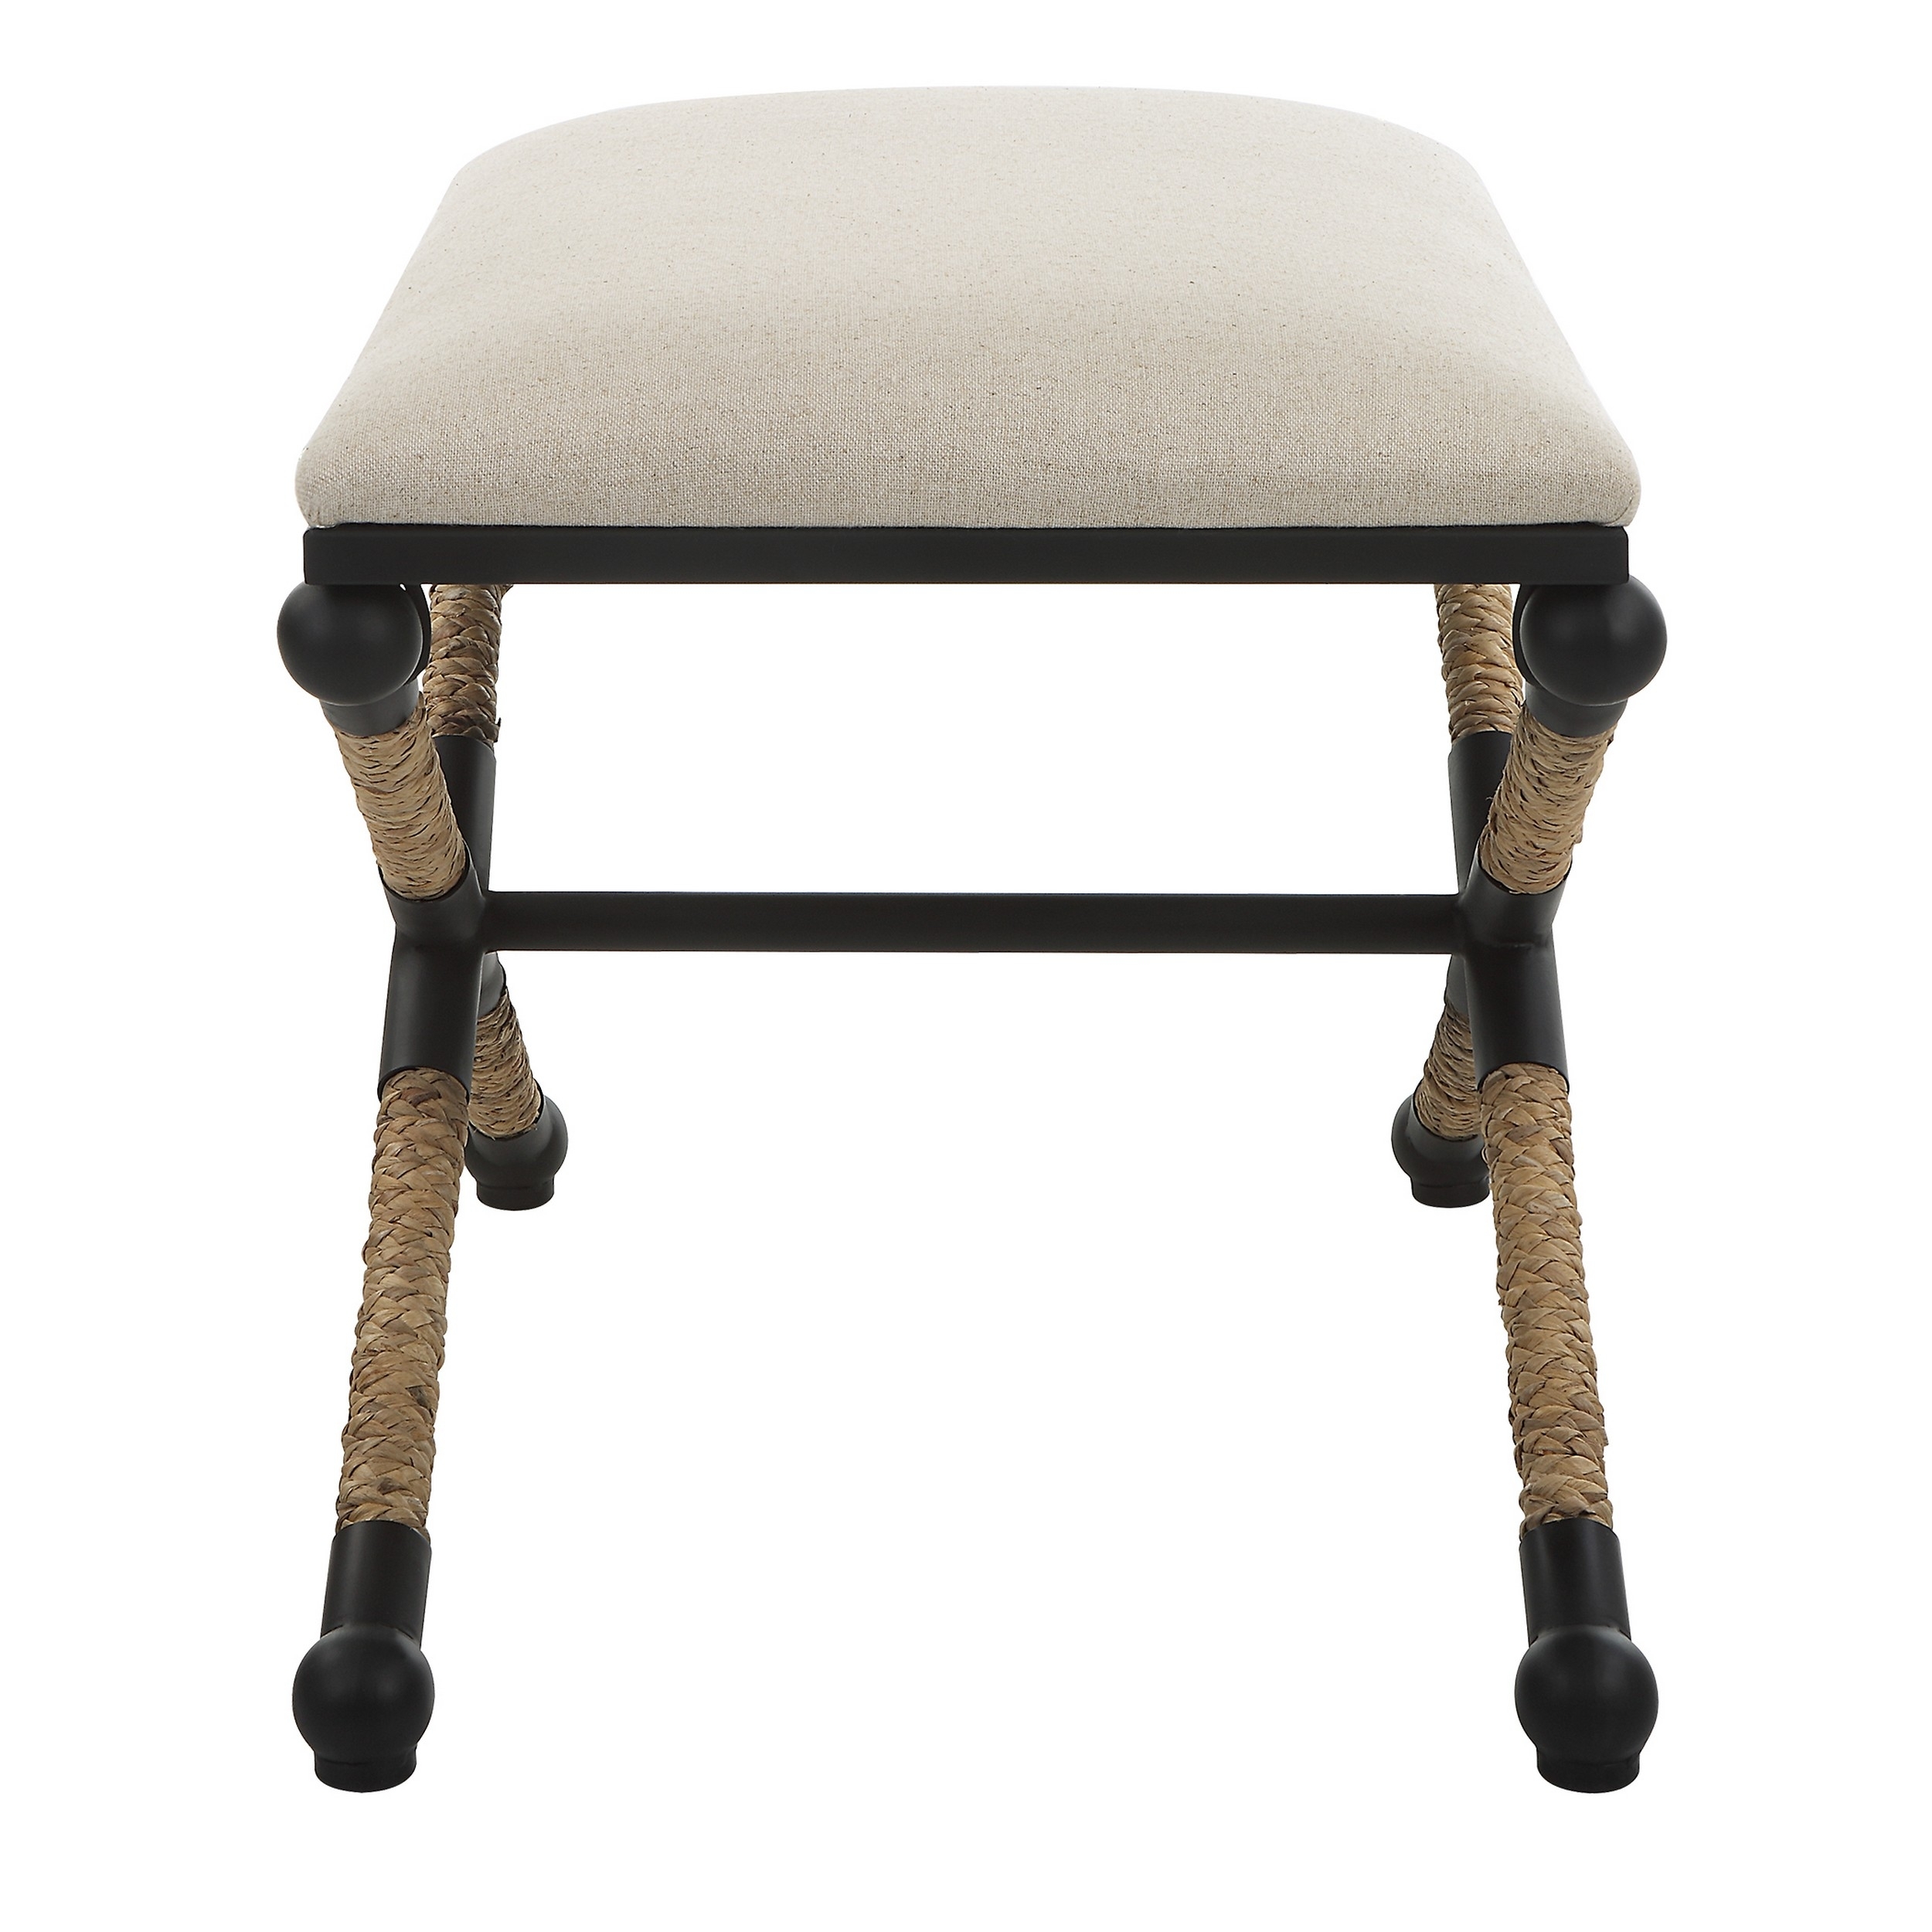 24 Inch Accent Stool, Cusioned Seat, Iron Black Frame, Off White Upholstery -Saltoro Sherpi